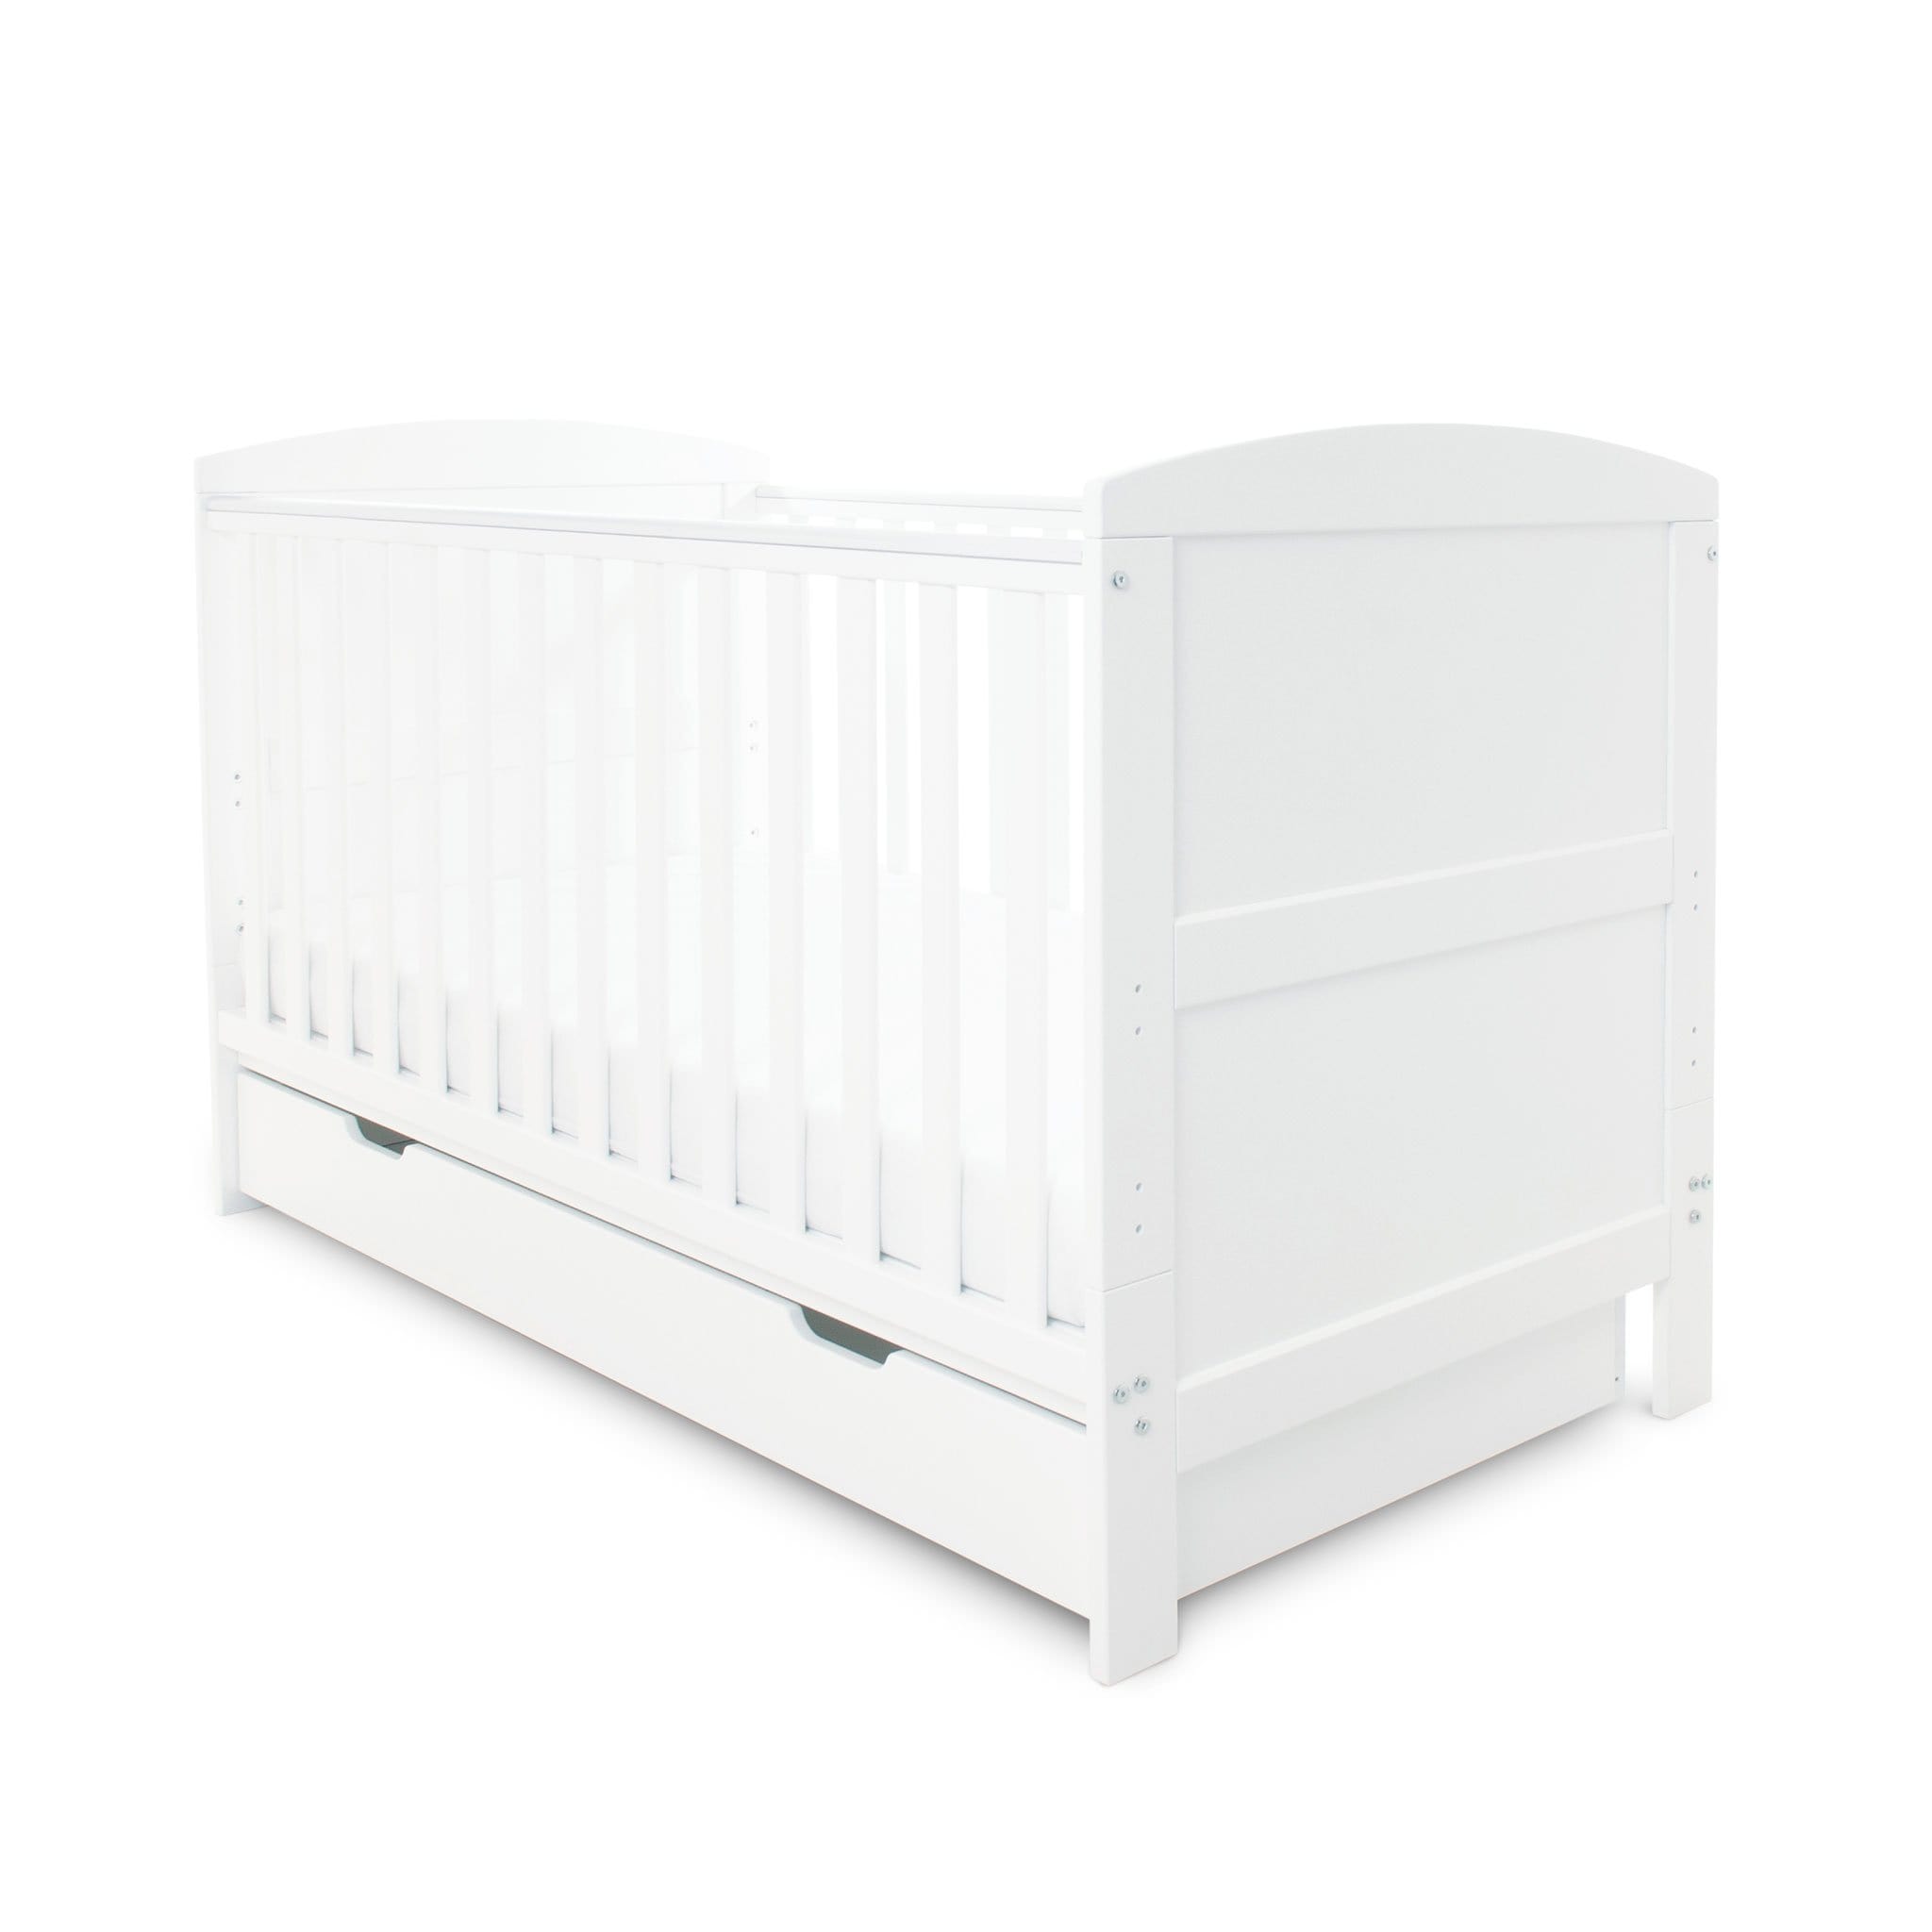 Ickle Bubba Cot Beds Ickle Bubba Coleby Classic Cot Bed with Under Drawer White 44-001-DRA-801